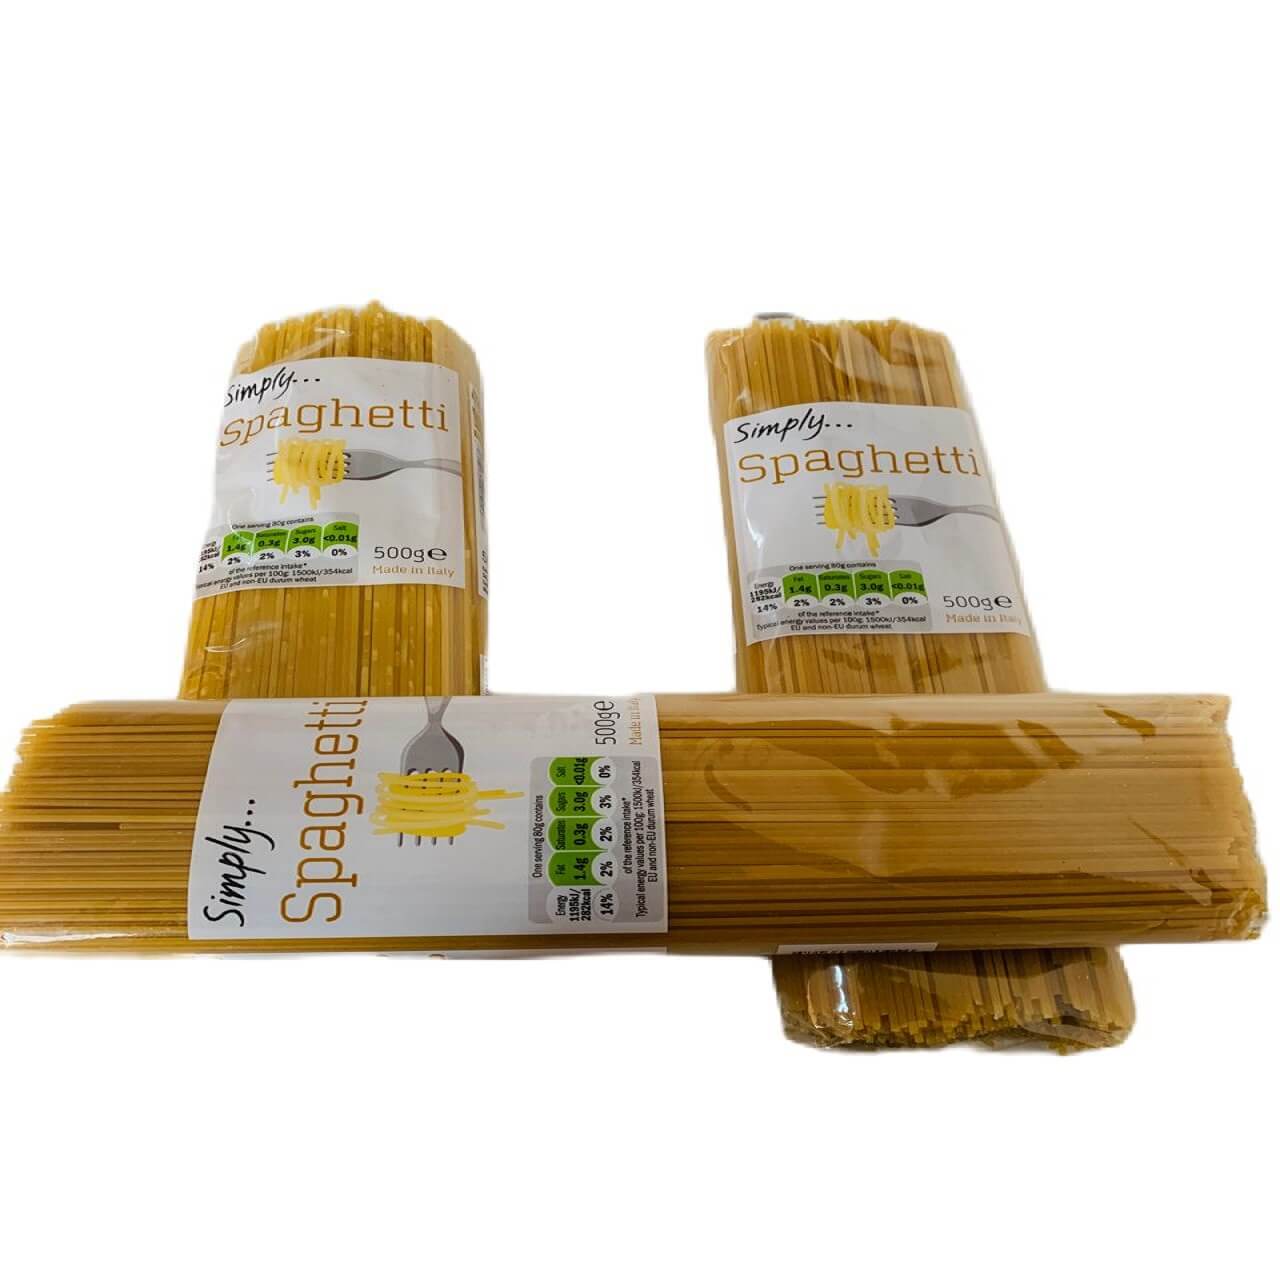 3 sachets of 500g of simply spaghetti